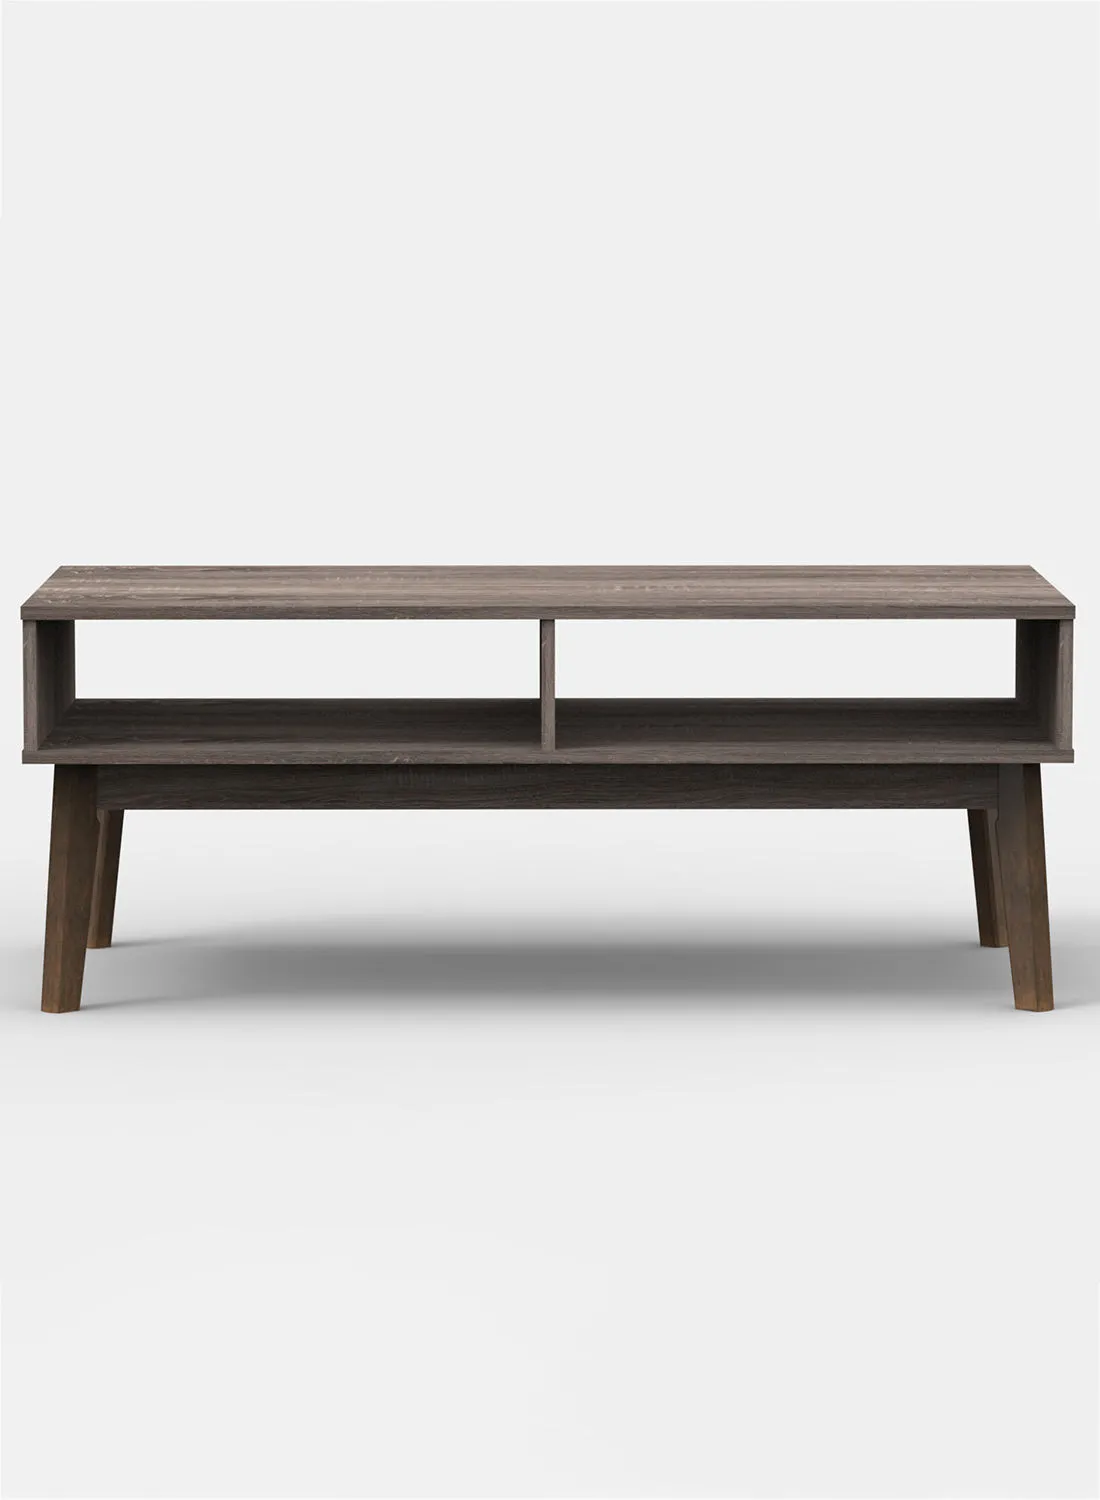 Switch Coffee Table Used As Coffee Corner And Side Table In Medium Sonoma Oak Wood - Size 1200 X 600 X 470